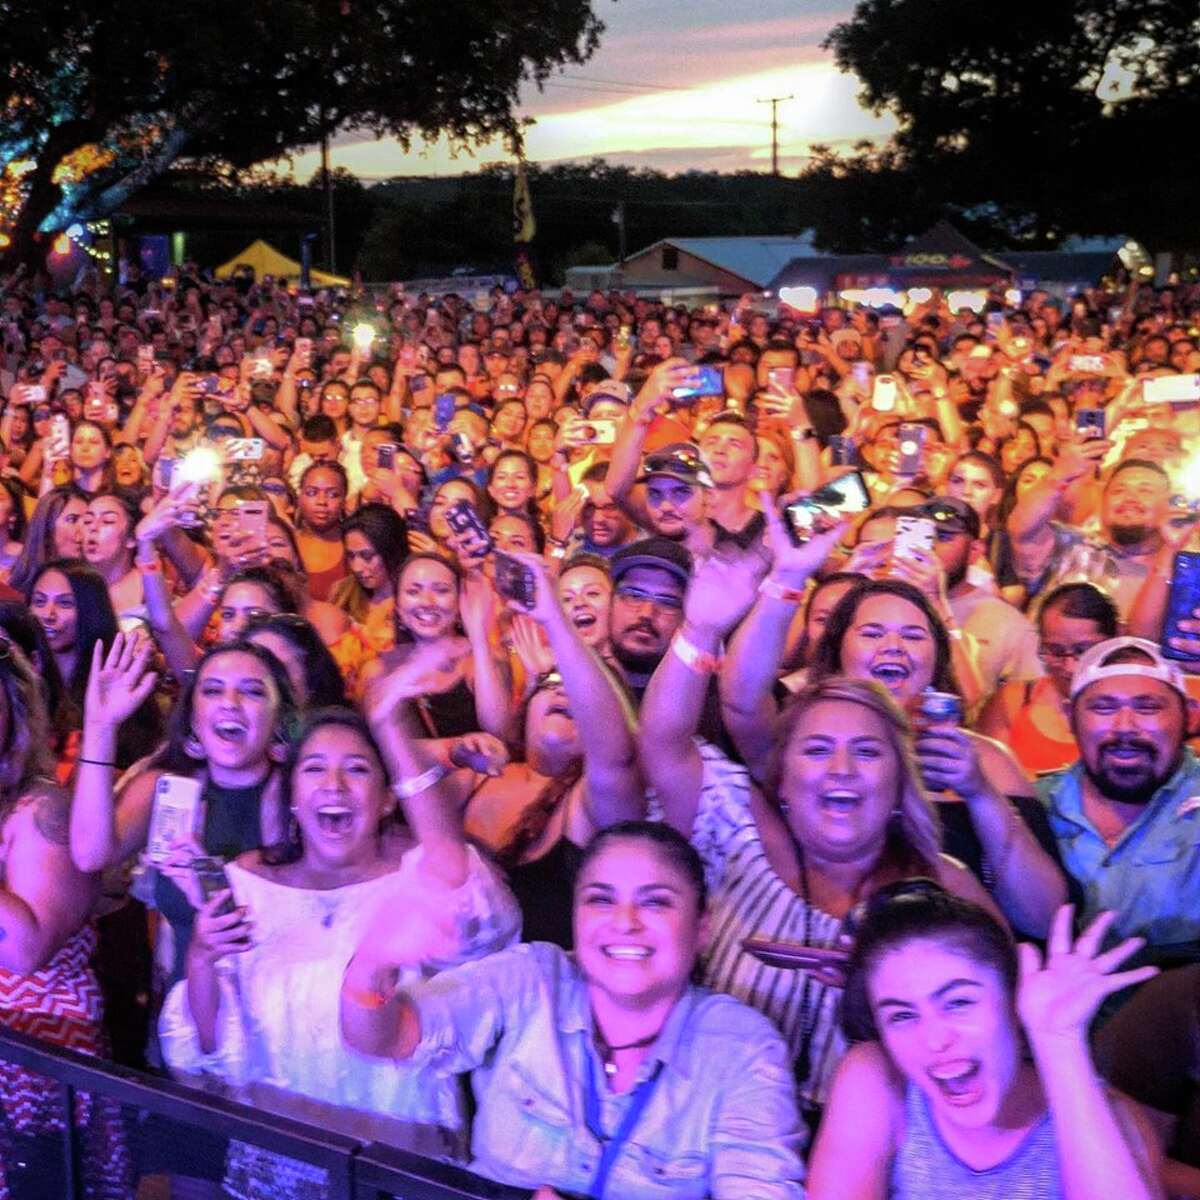 Y100 Bud Light Big Reveal brought in record-breaking county artist Luke Combs to a surprise a crowd at John T. Floore Country Store on June 19, 2019.